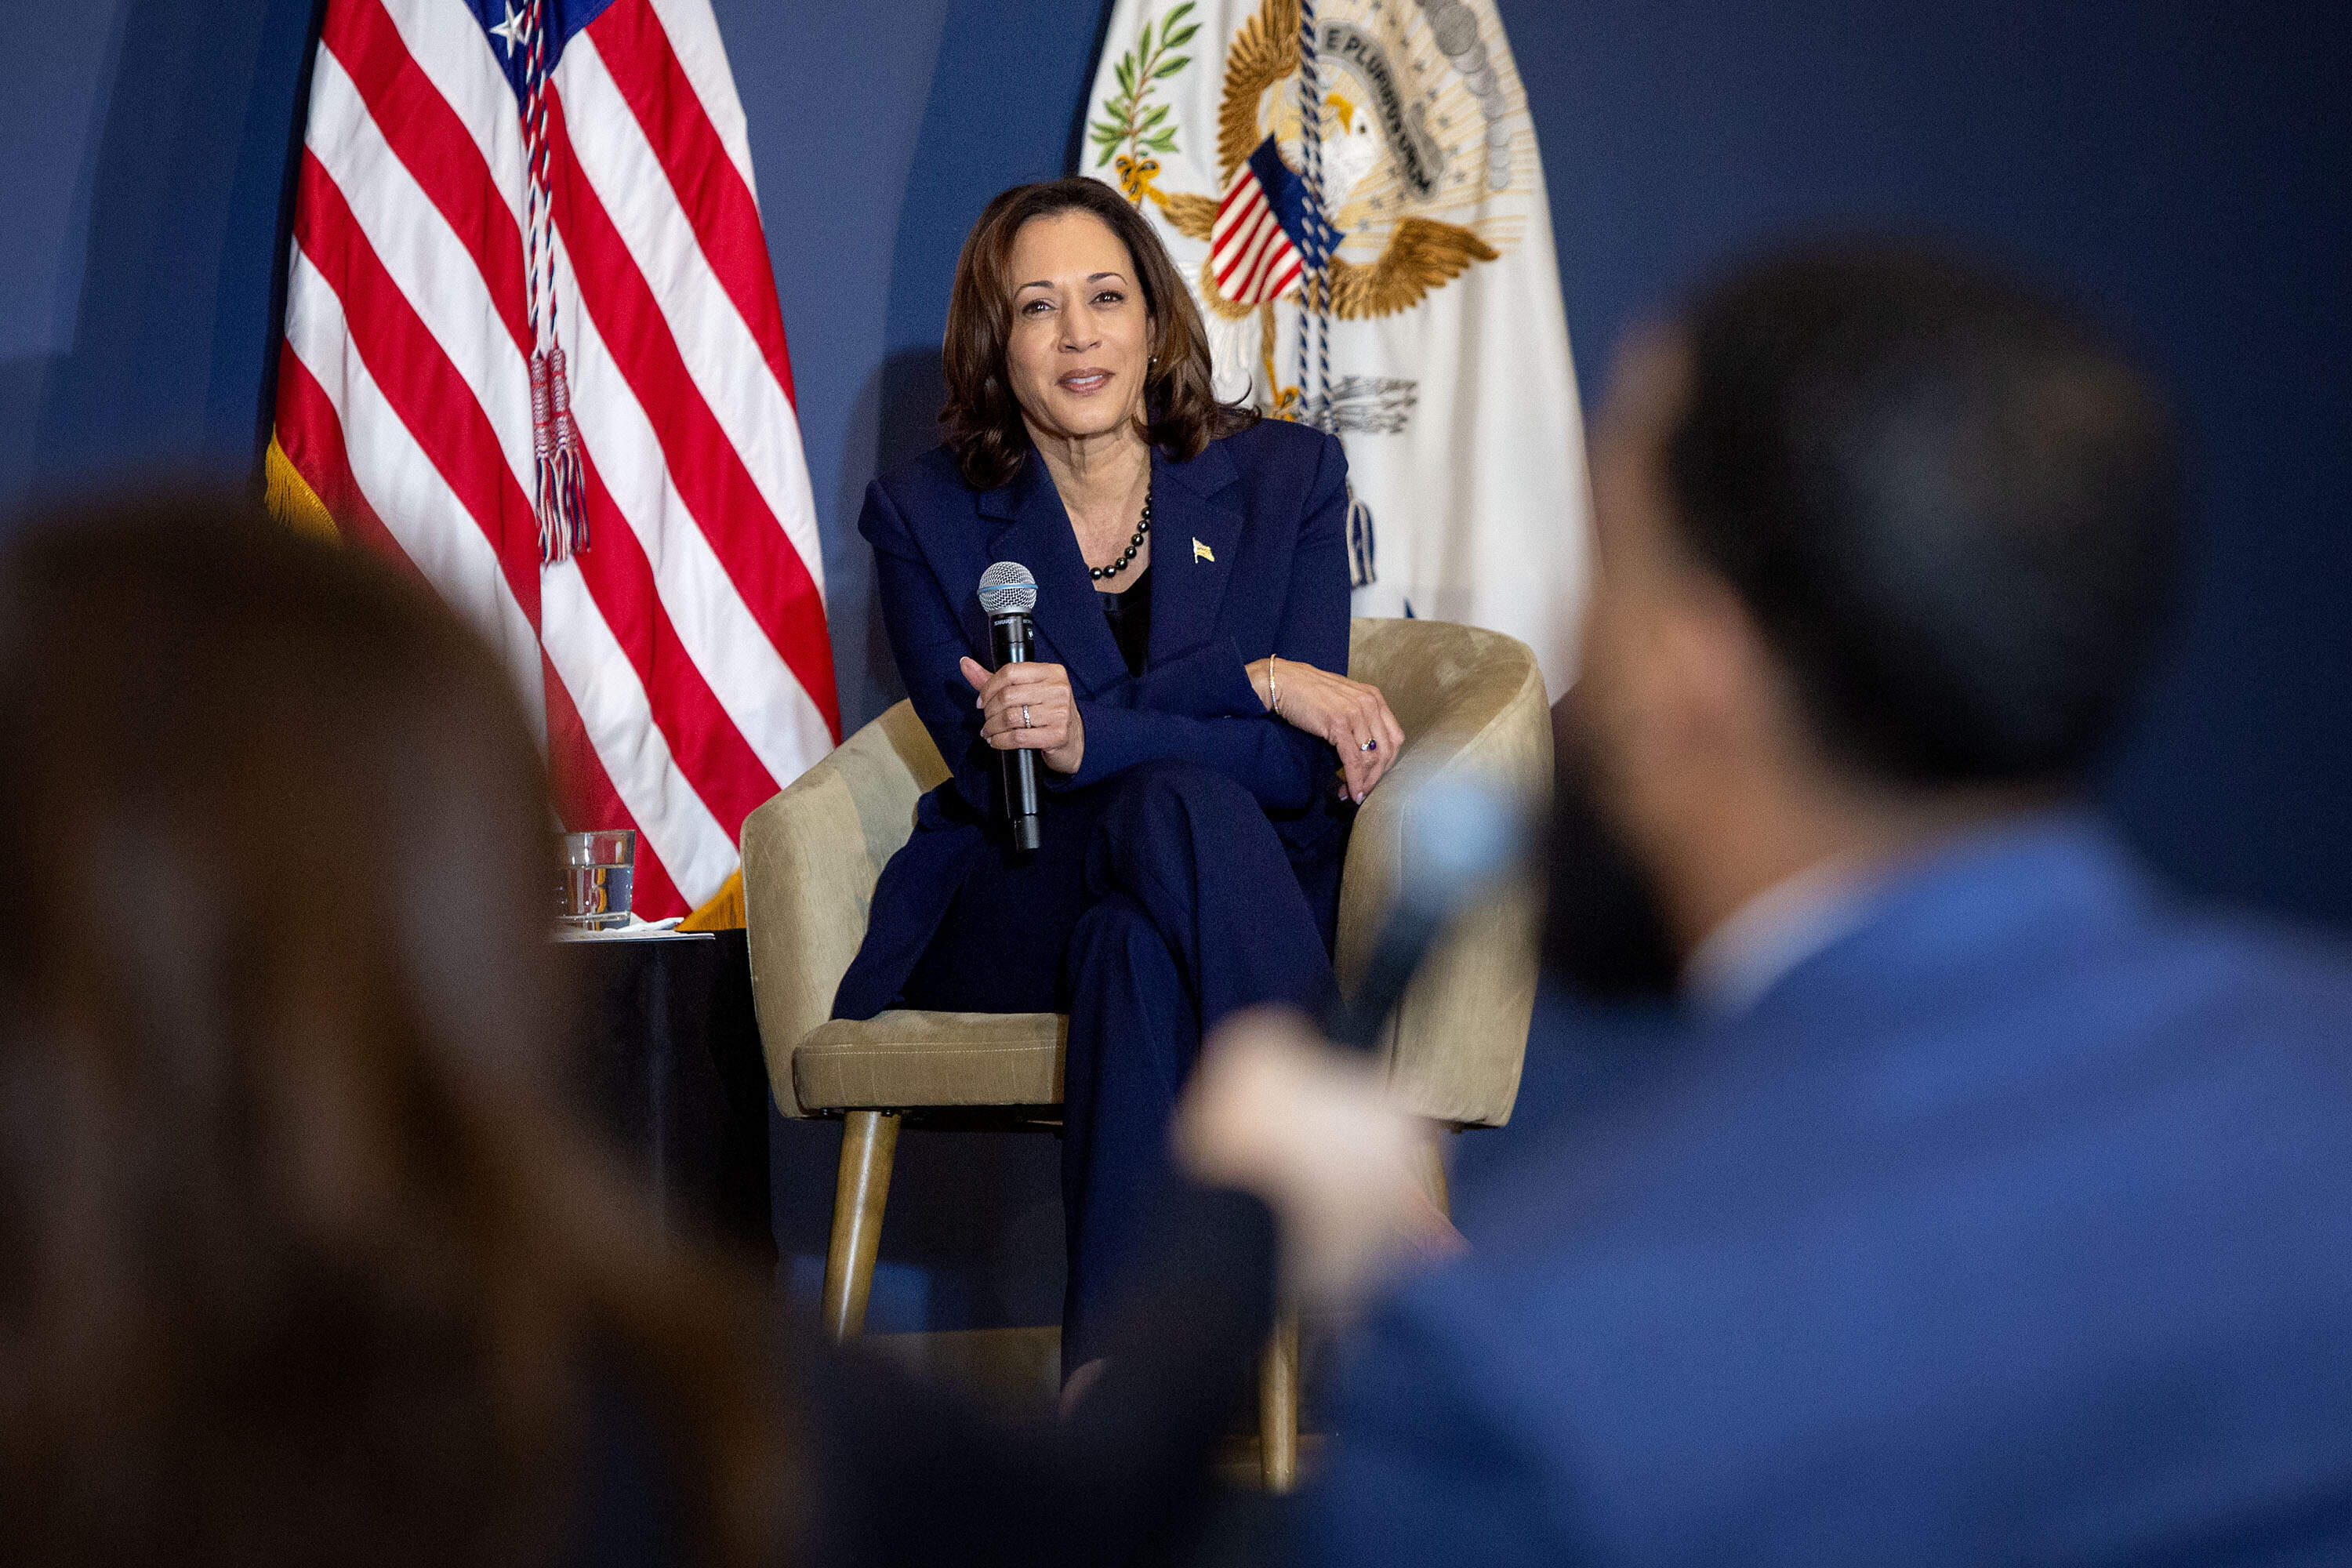 Vice President Kamala Harris takes a question from the audience at Pipefitters Local 537 in Dorchester. (Robin Lubbock/WBUR)